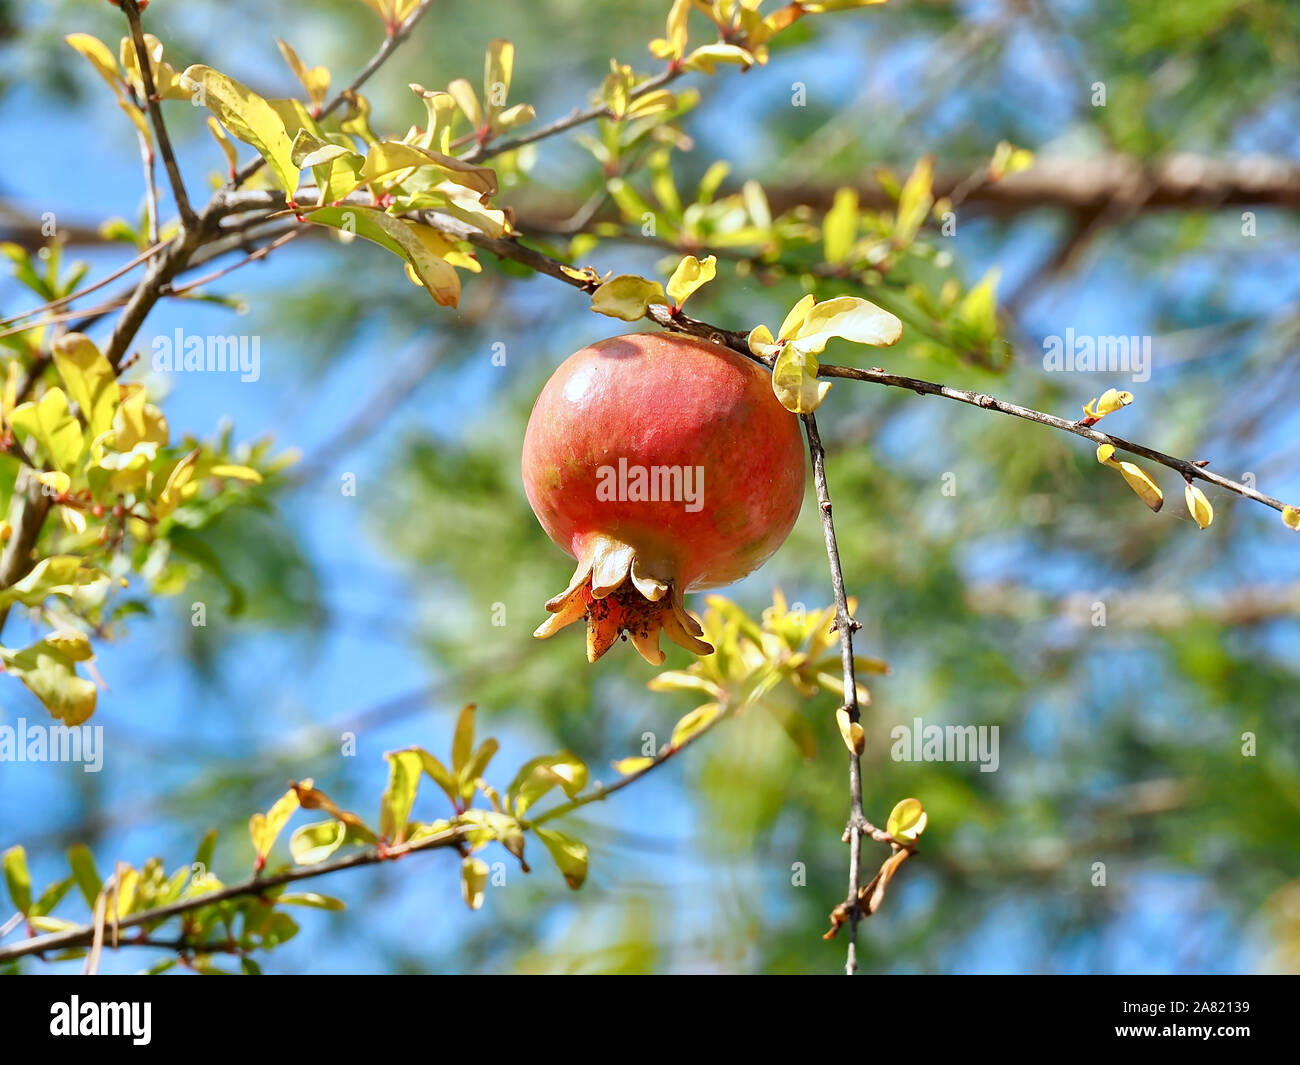 Macro of a ripe pomegranate hanging on a tree Stock Photo